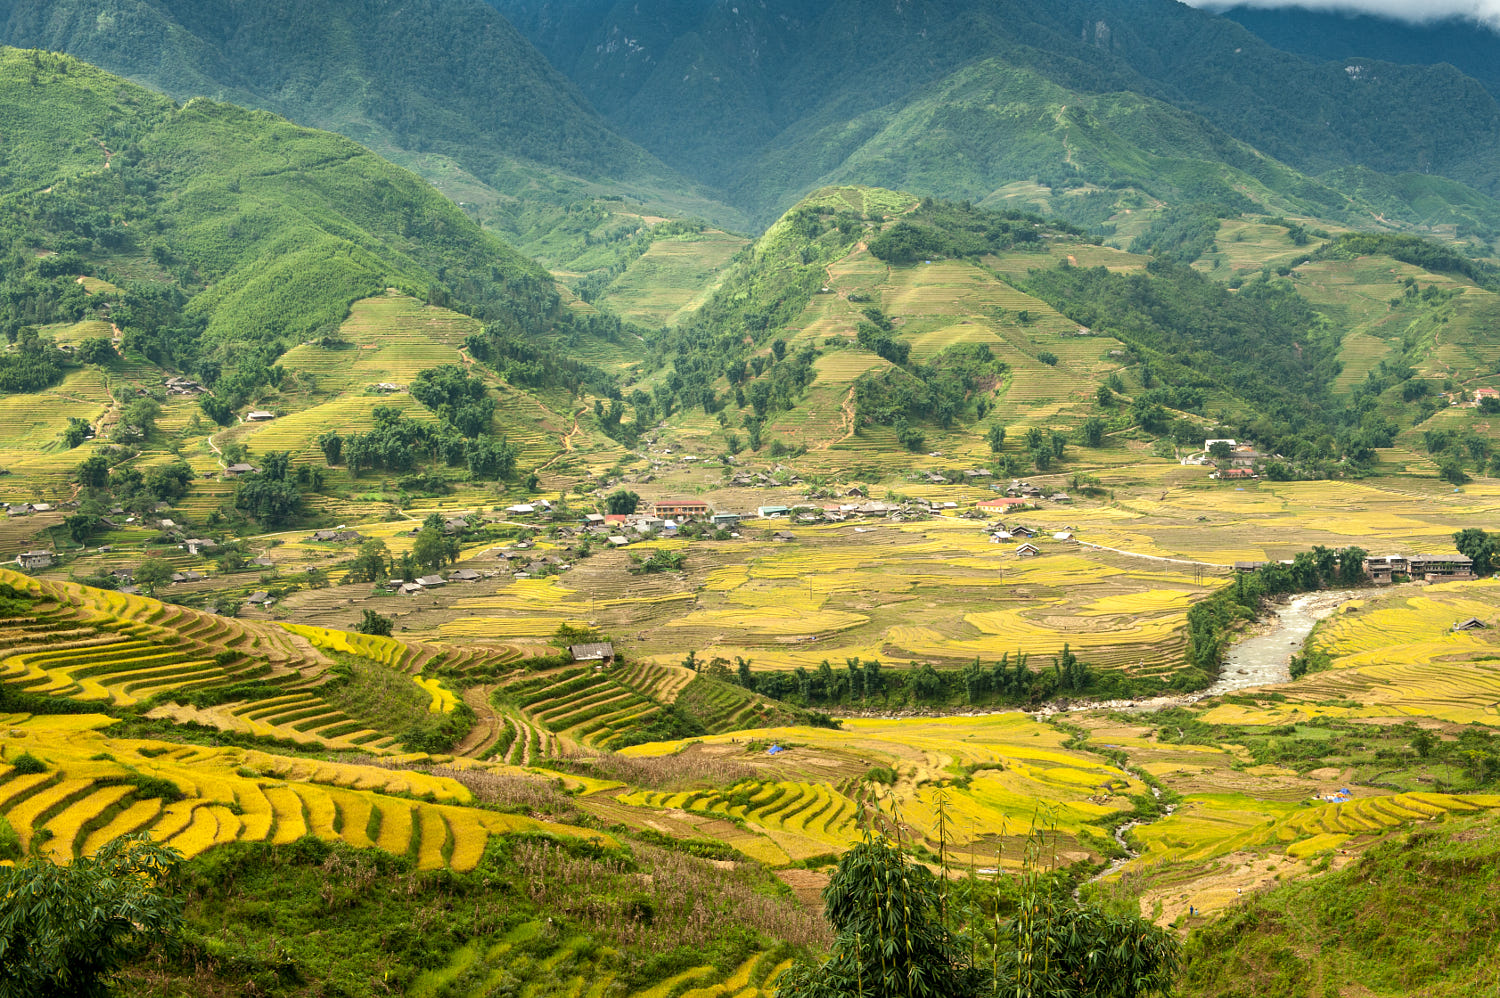 Muong Hoa valley (Sapa) - one of the most famous destination for breathtaking scenery